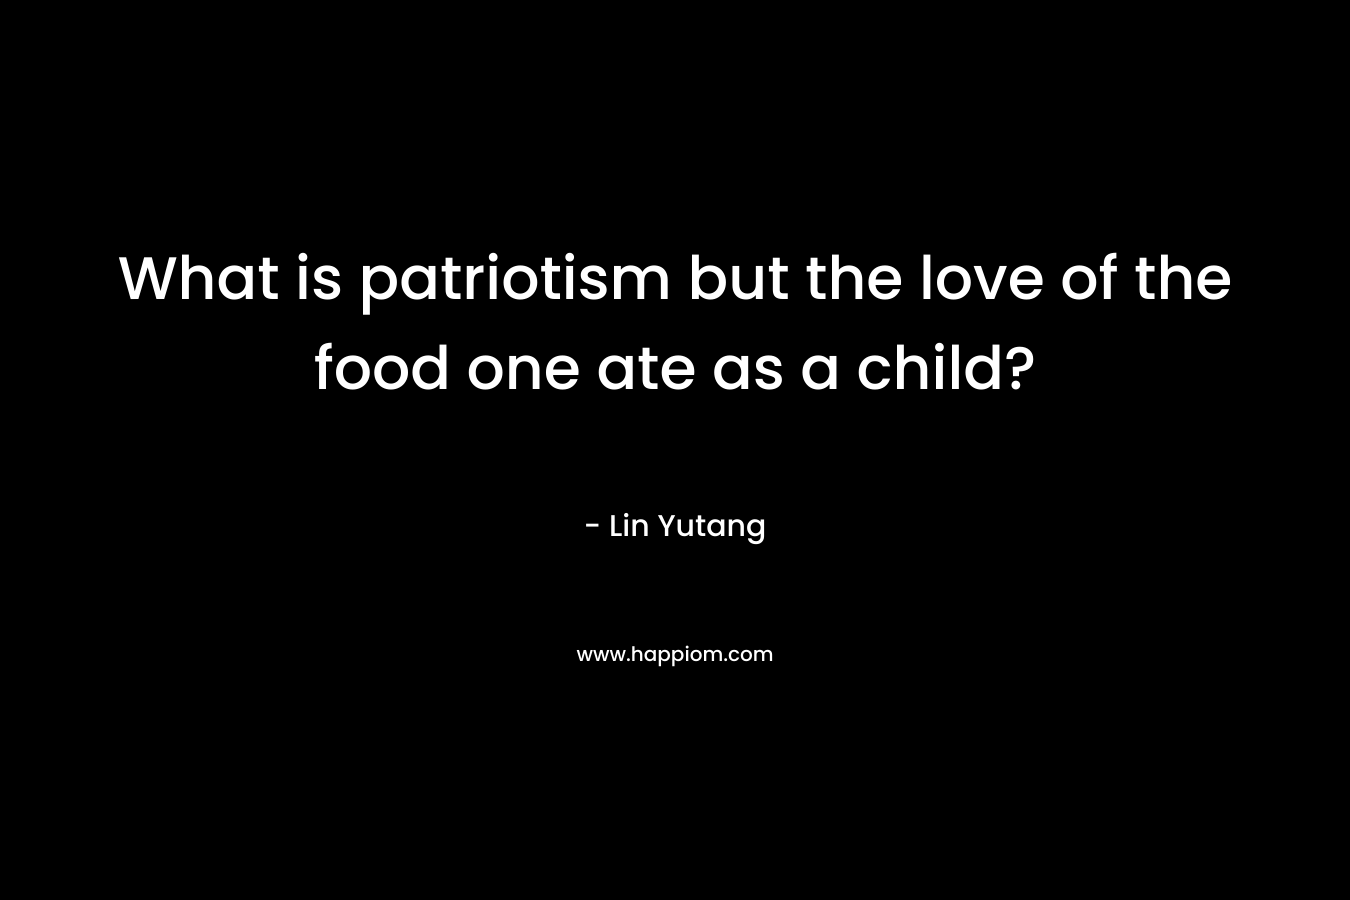 What is patriotism but the love of the food one ate as a child?